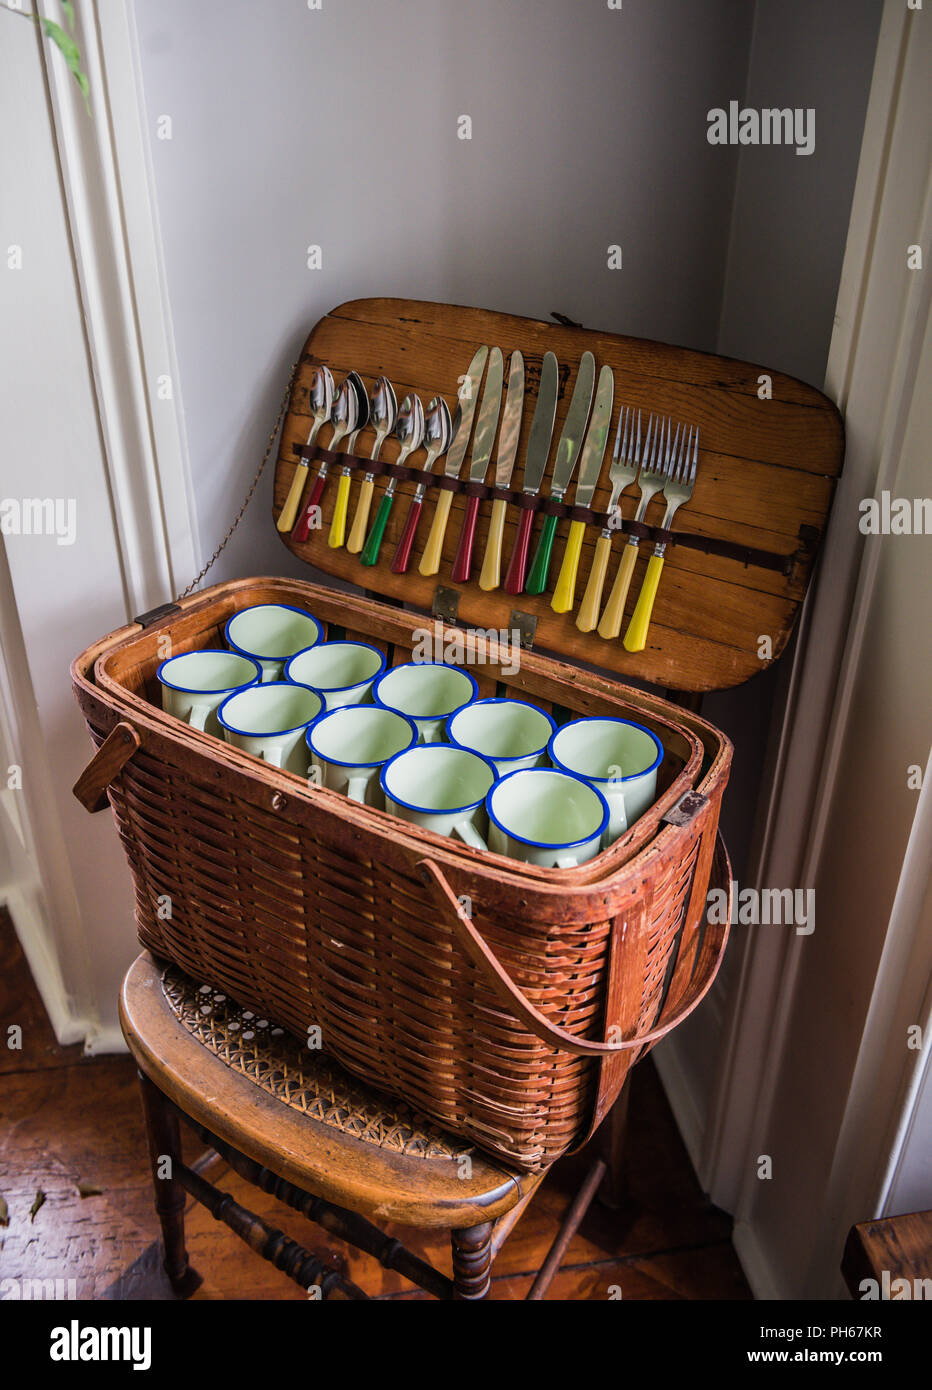 Open retro wicker picnic basket filled with white cups and silverware. Stock Photo